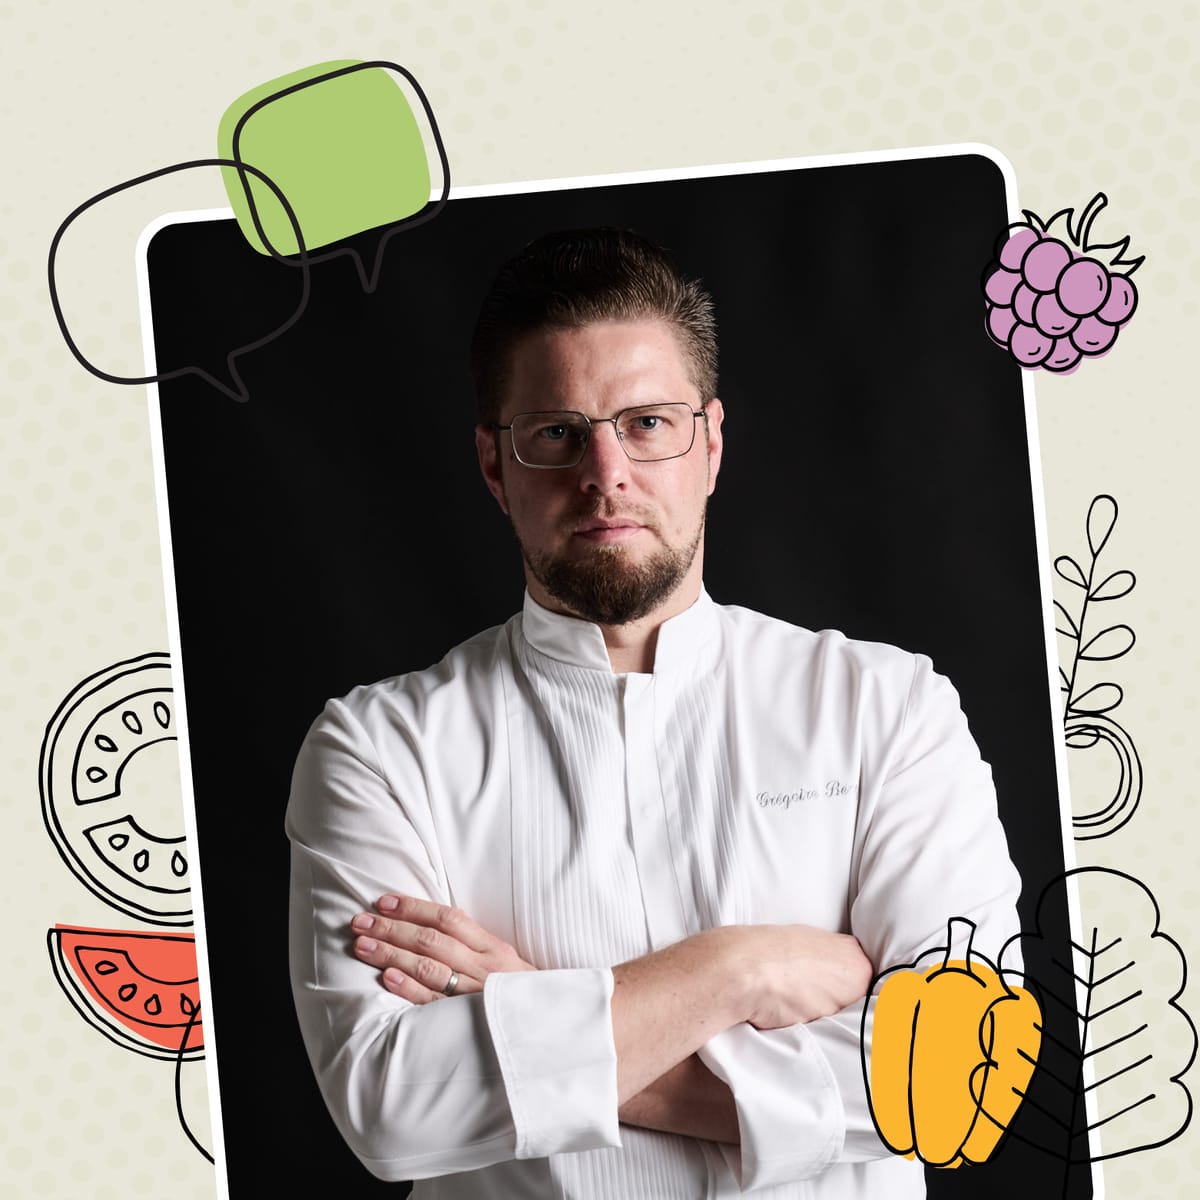 Taste is and isn’t subjective, with Chef Gregoire Berger (the artist)